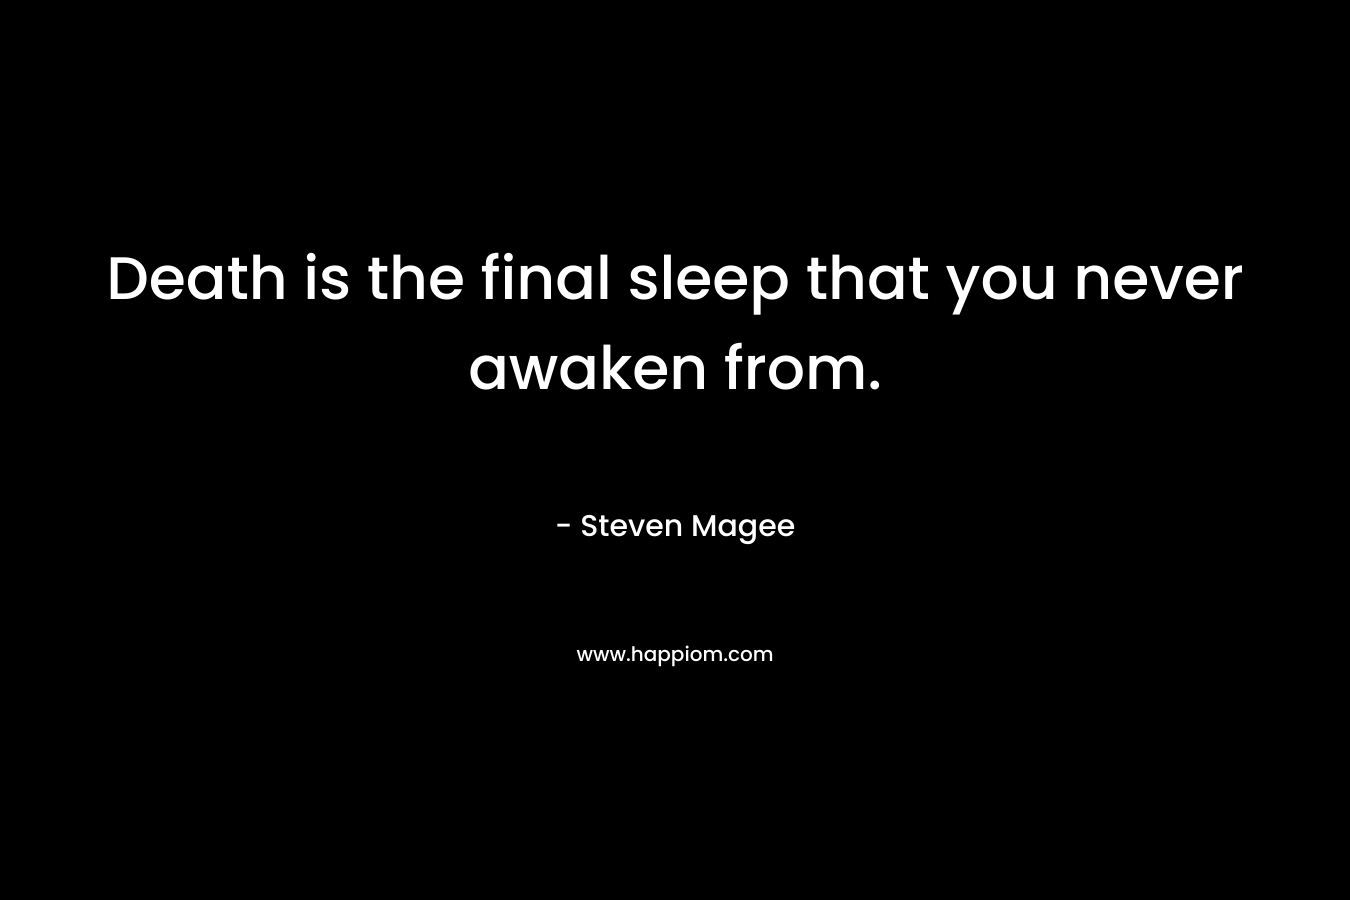 Death is the final sleep that you never awaken from. – Steven Magee